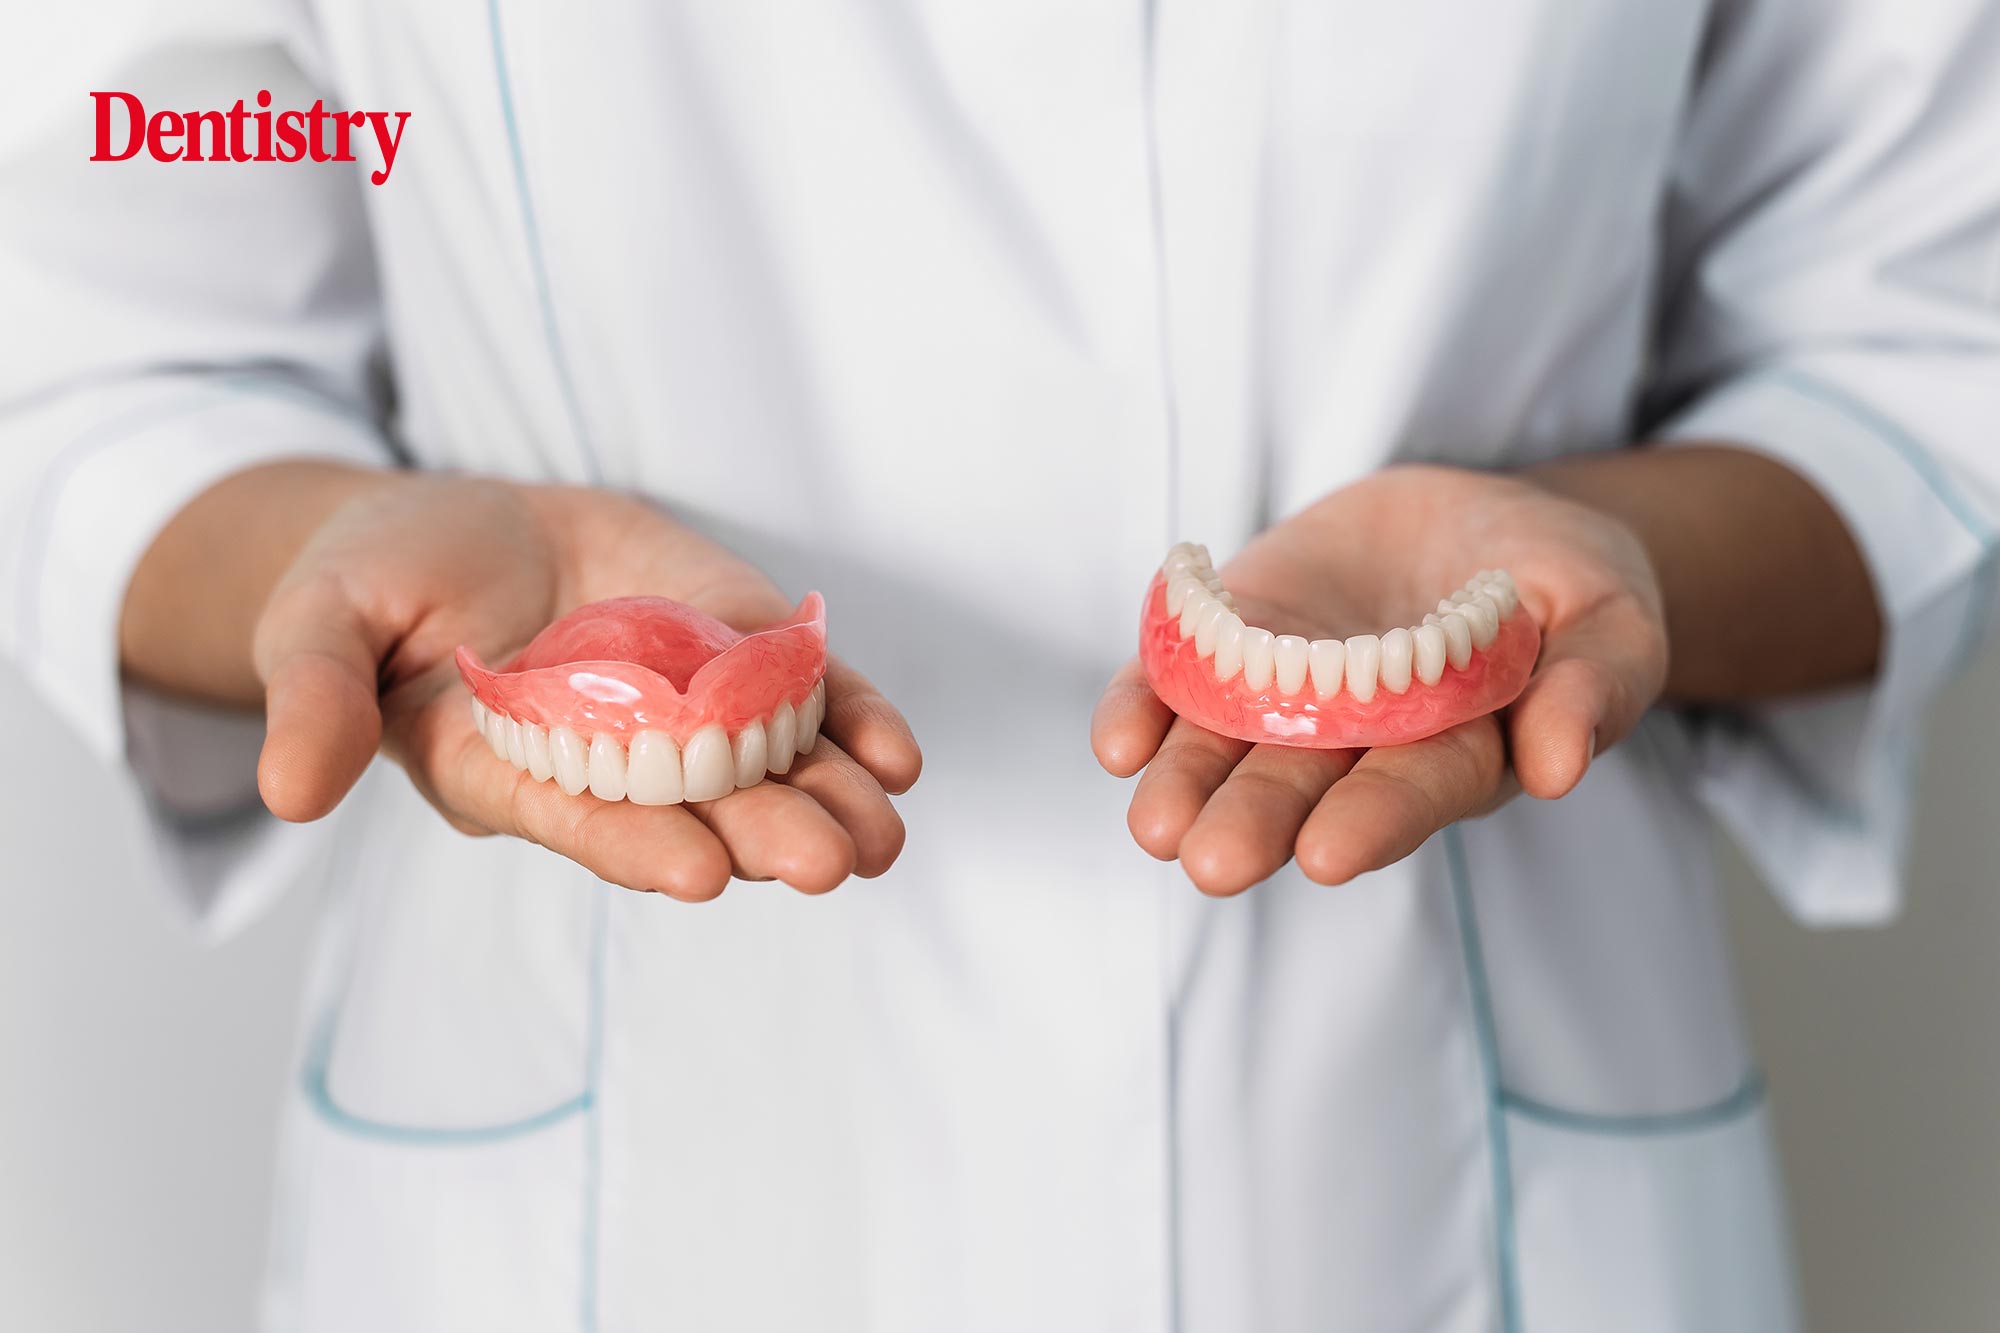 Many people find dentures to be a challenging part of their work. But since they aren't going away for the foreseeable future, dentist and qualified dental technician, Paul Middleton, gives his advice for improving your denture work.